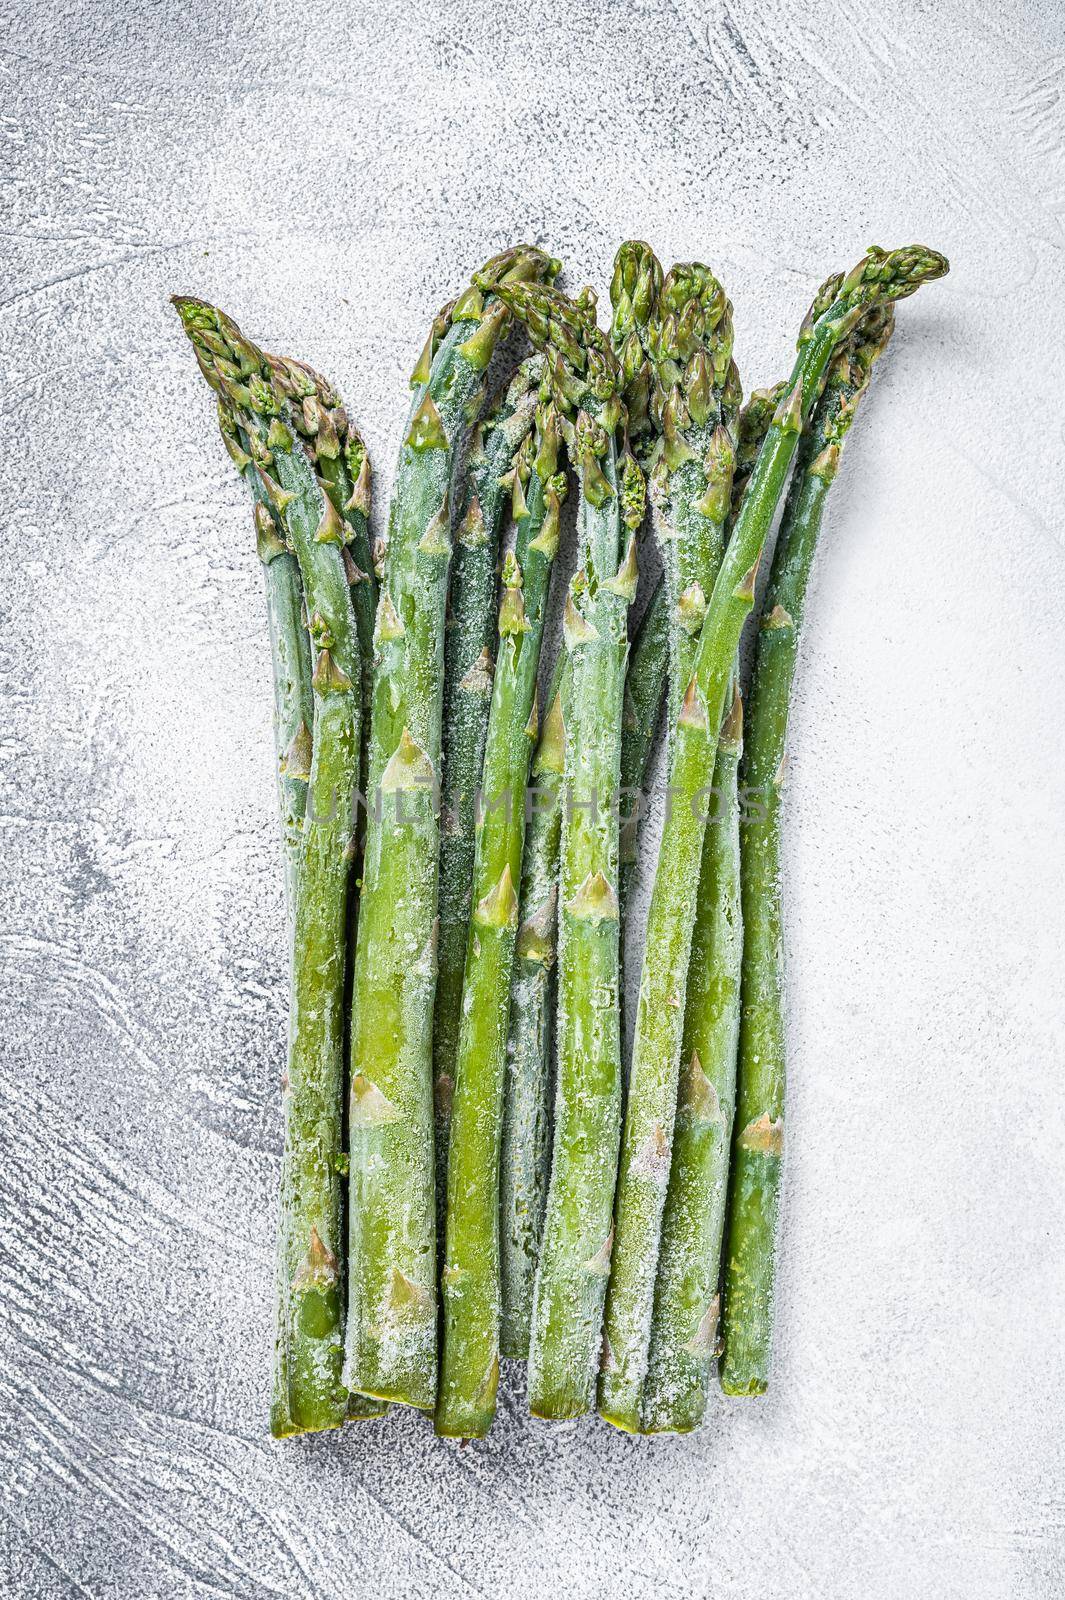 Frozen cold asparagus on a old kitchen table. White background. Top view.